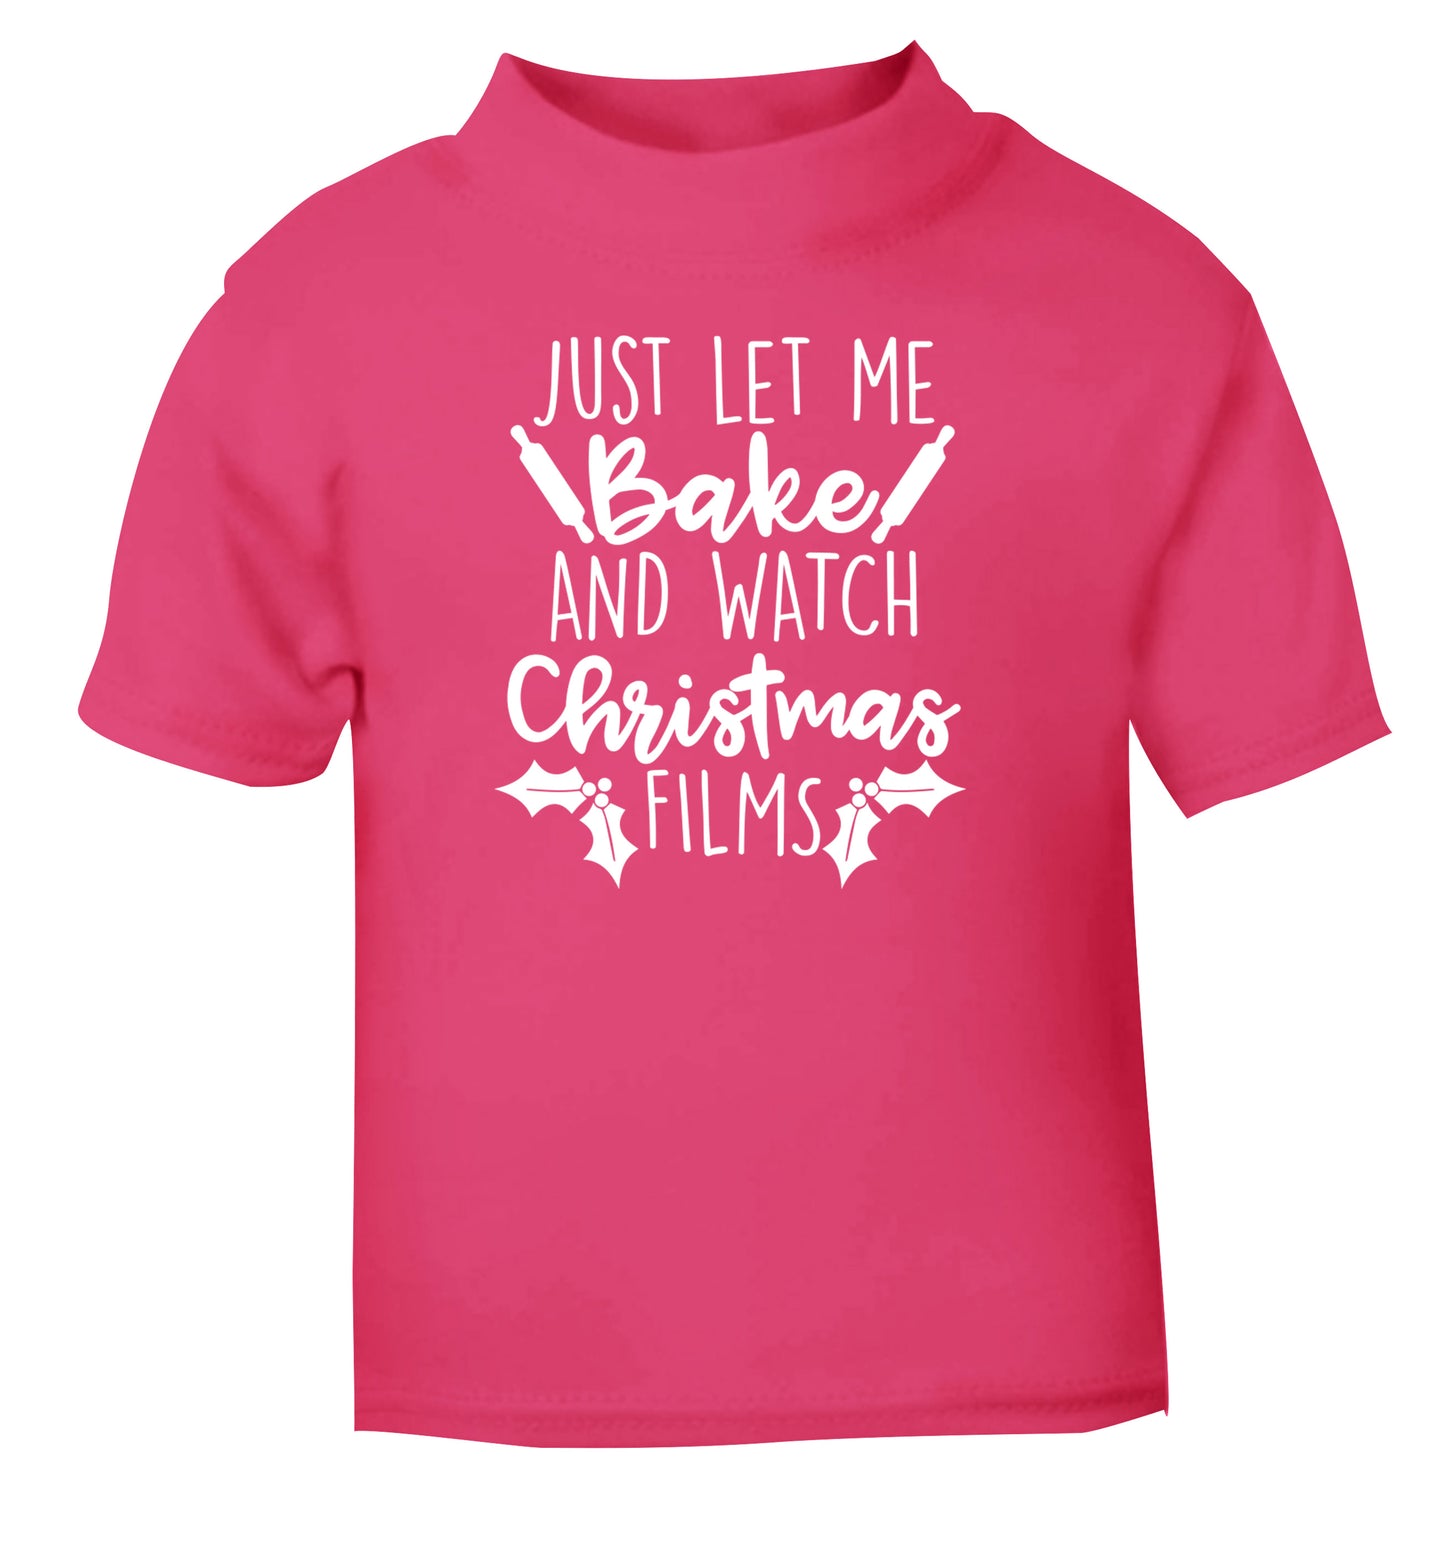 Just let me bake and watch Christmas films pink Baby Toddler Tshirt 2 Years